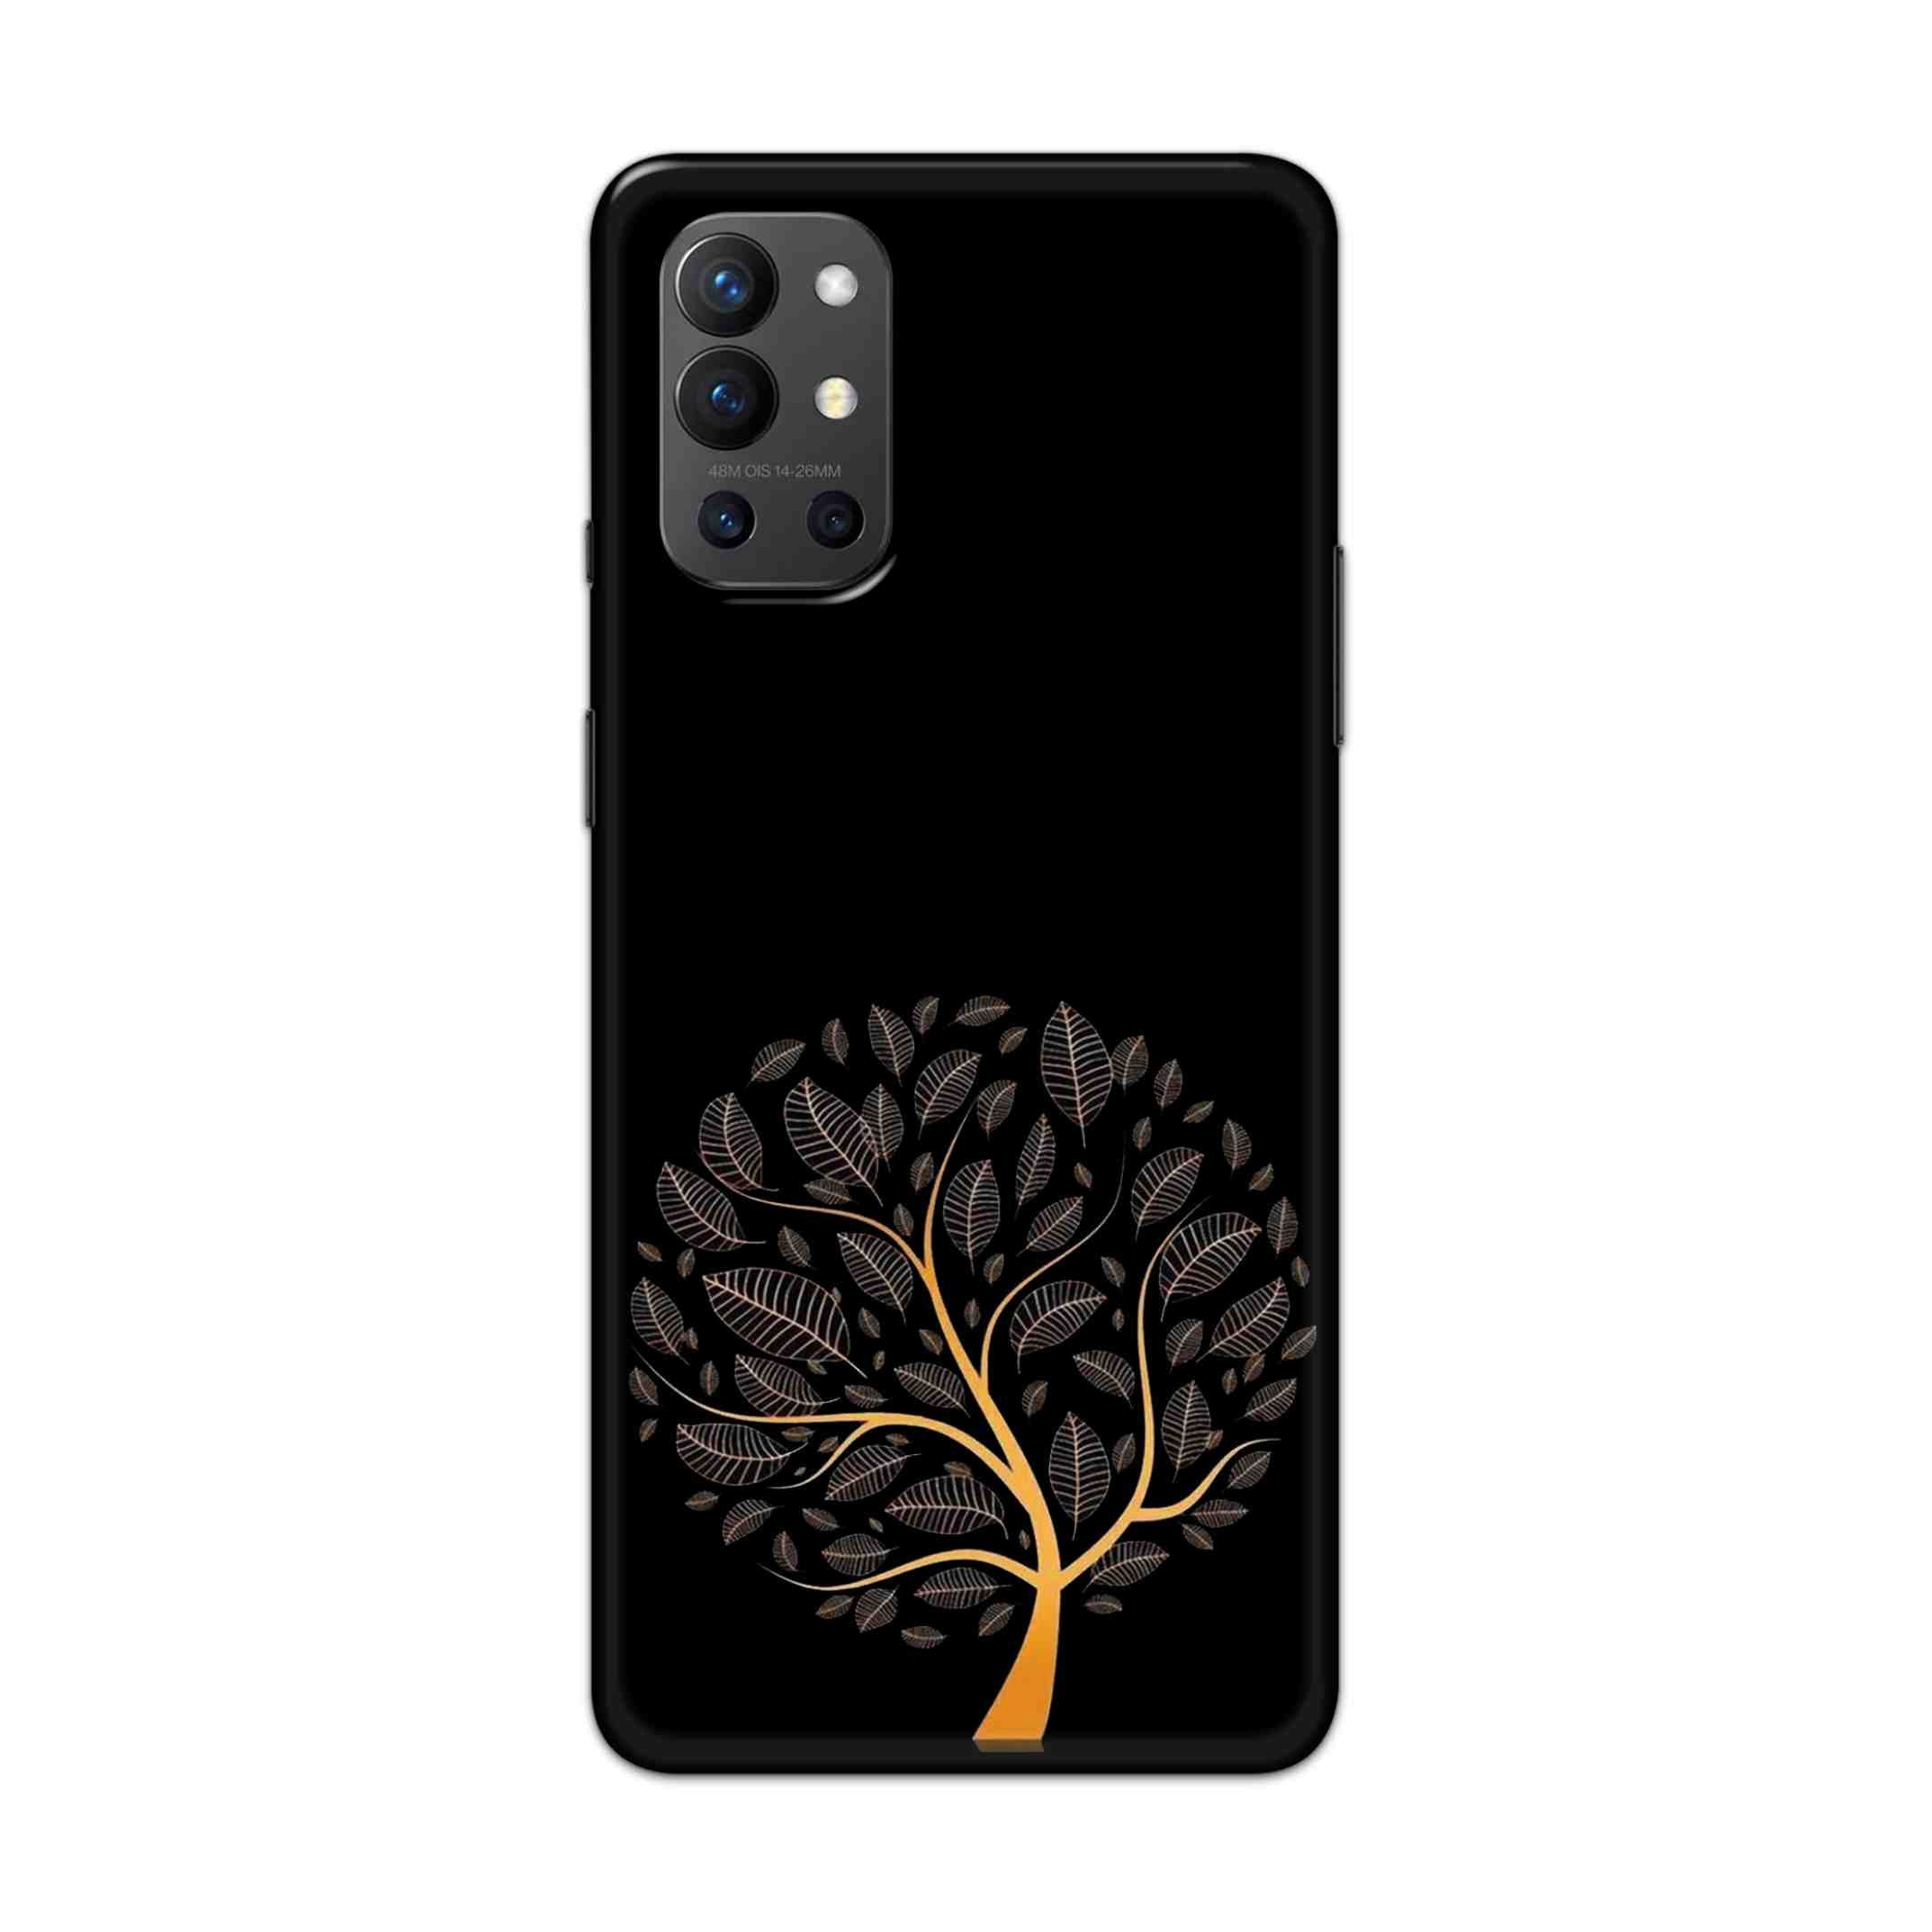 Buy Golden Tree Hard Back Mobile Phone Case Cover For OnePlus 9R / 8T Online